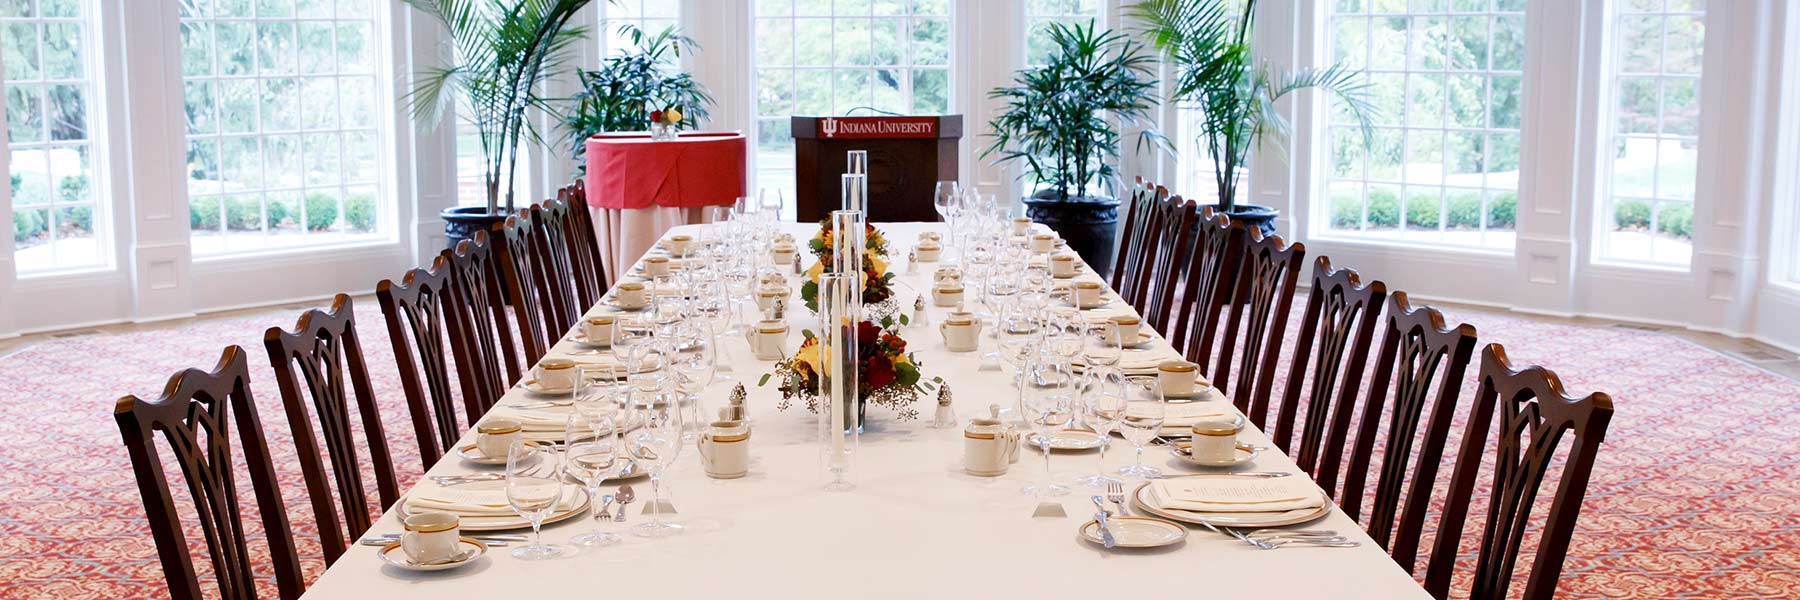 A long table is set with china and stemware for a formal dinner; a podium with IU sign stands at the head of the table.